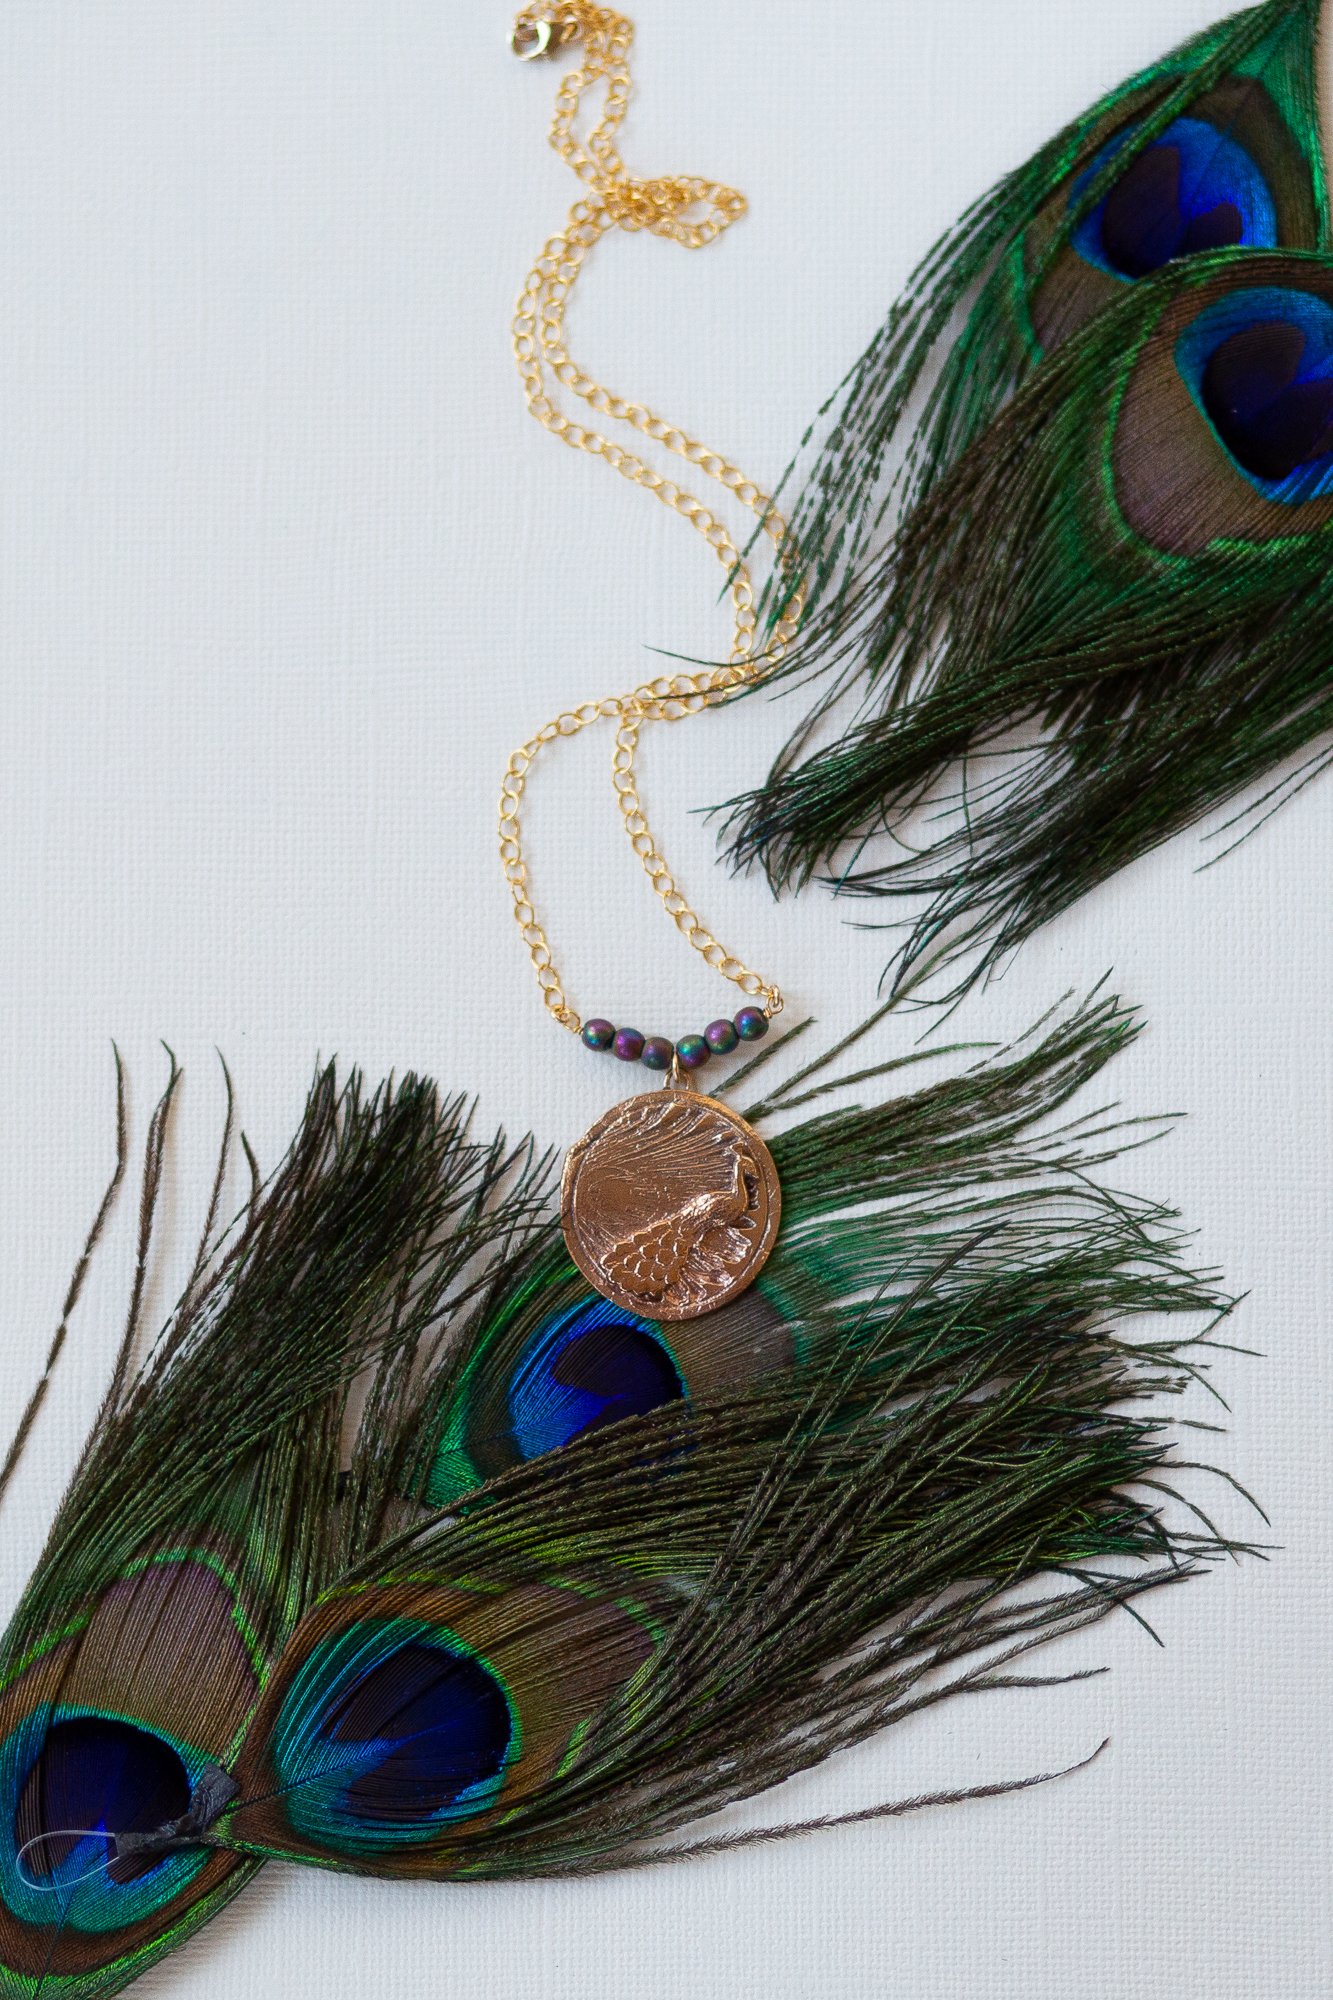 Buy Trimmed Peacock Feather Necklace and Earrings Set Online in India - Etsy